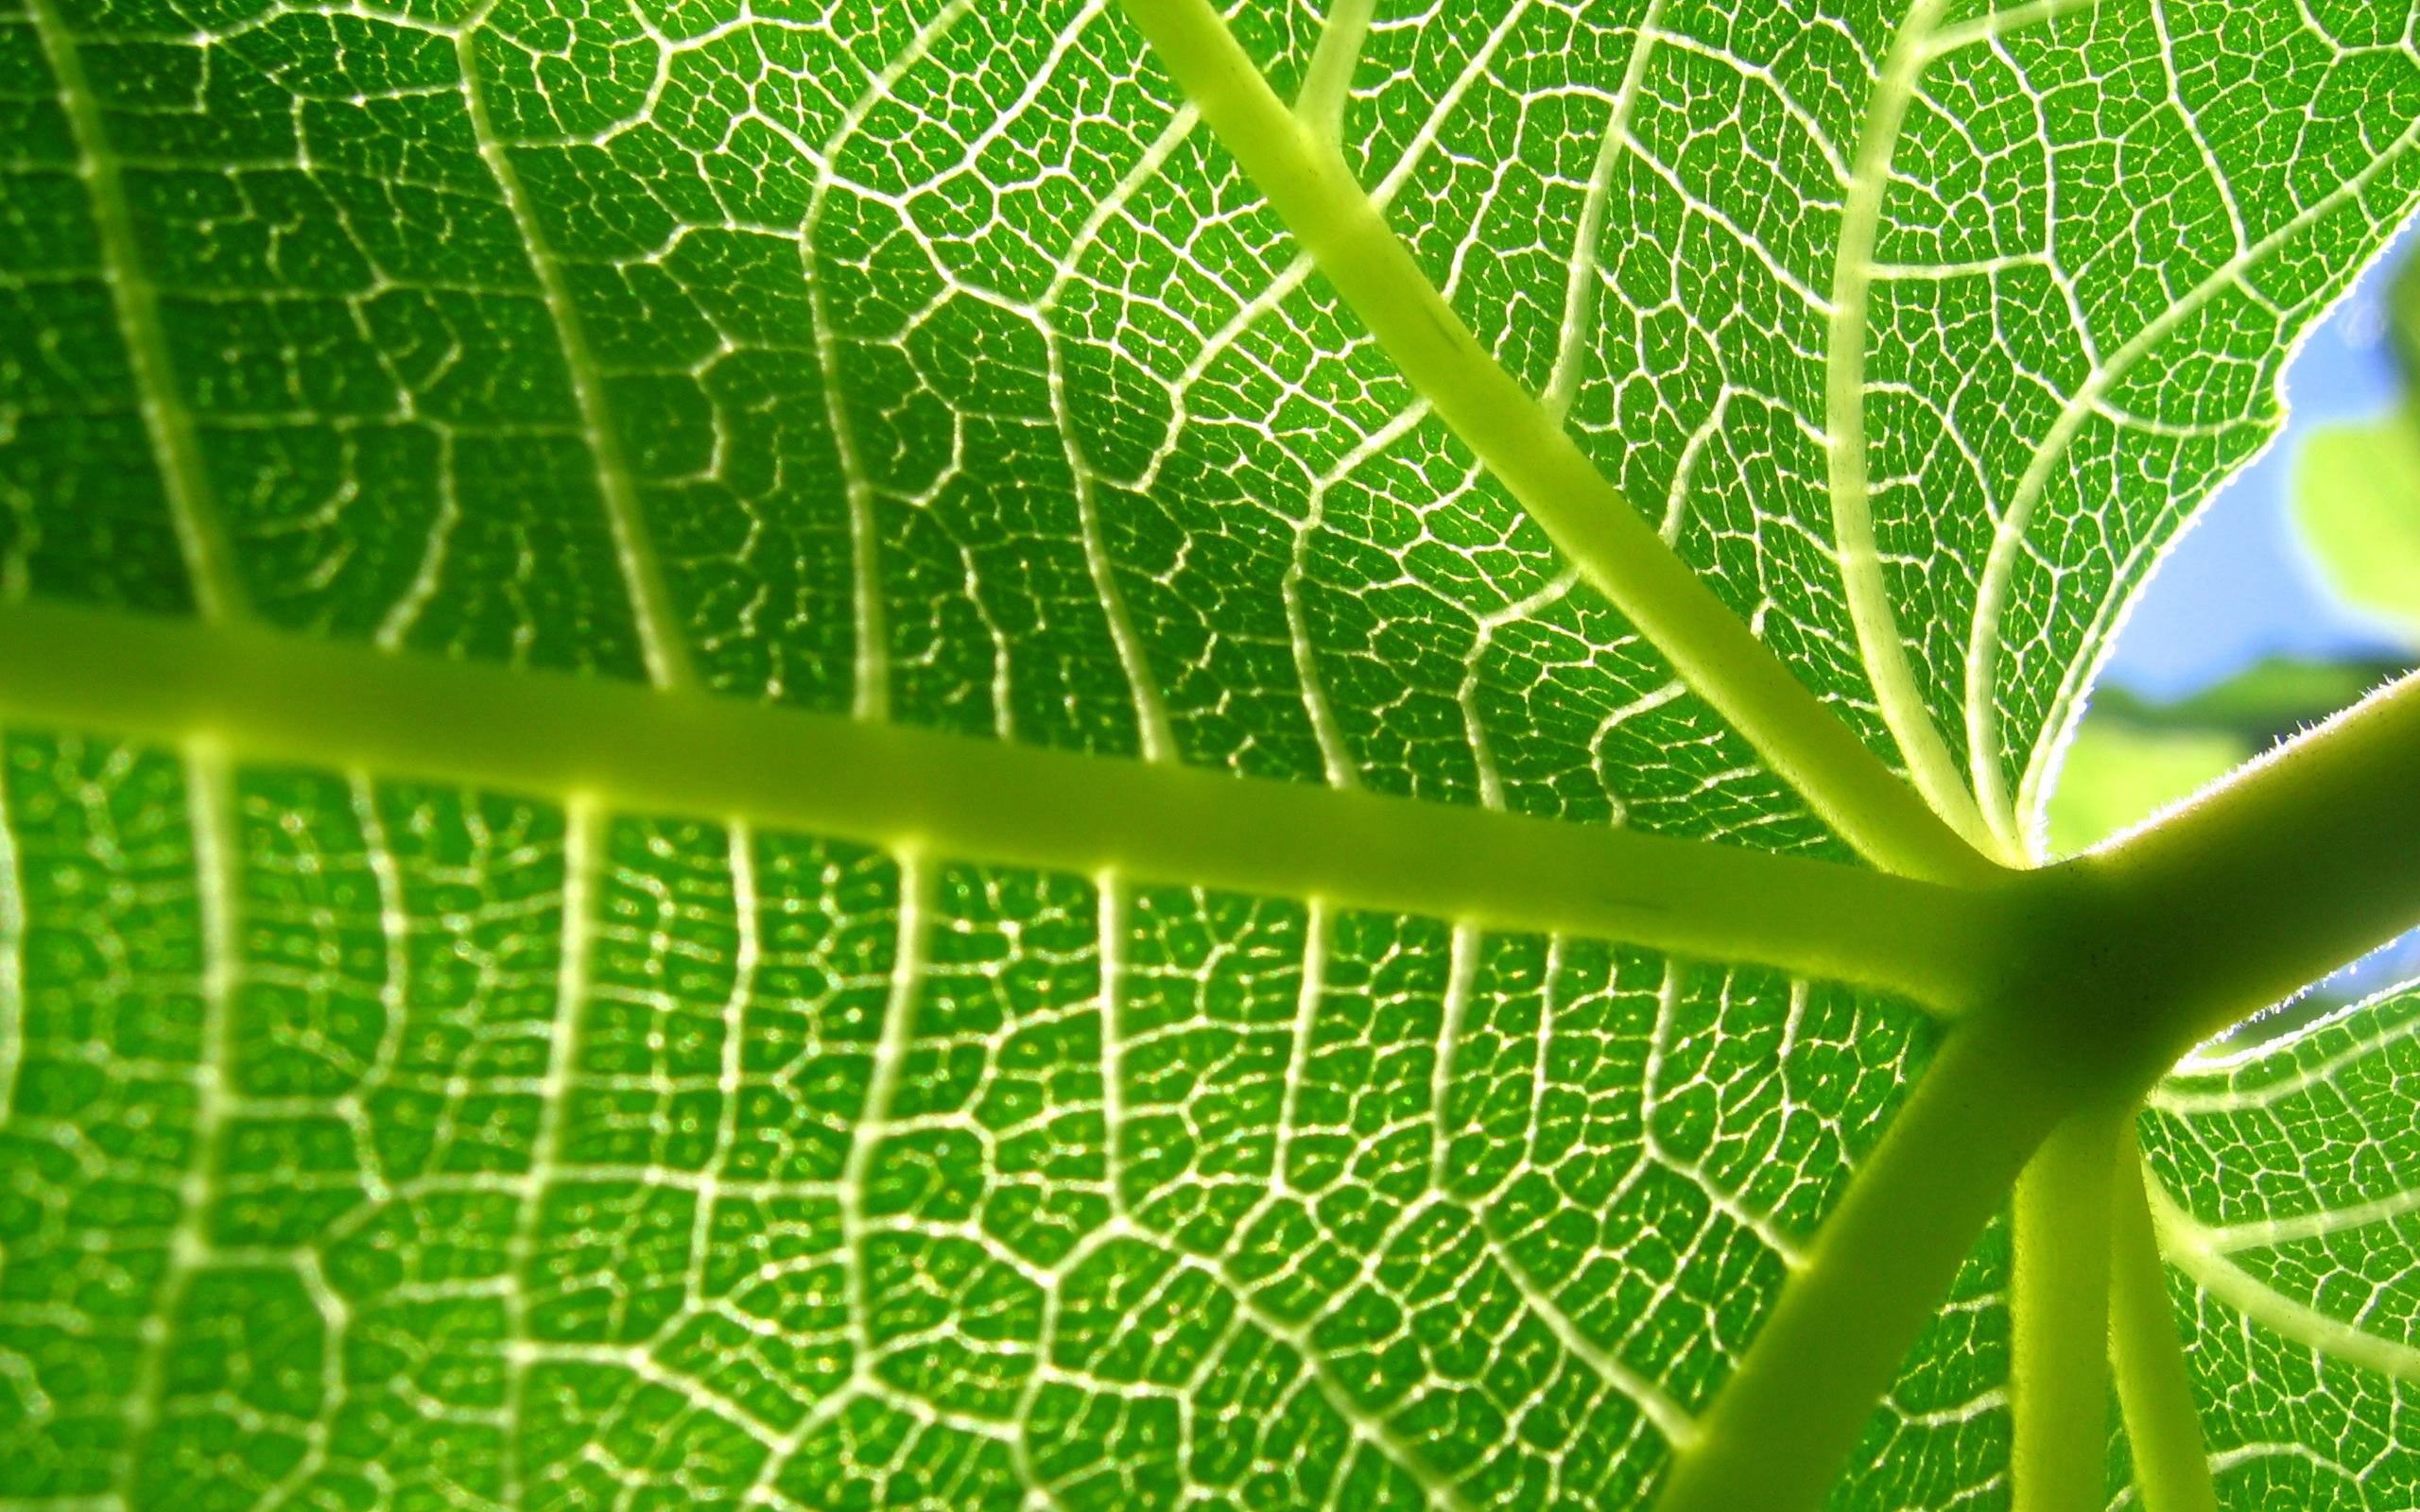 Large green leaves close-up flower wallpaper (2) #13 - 2560x1600